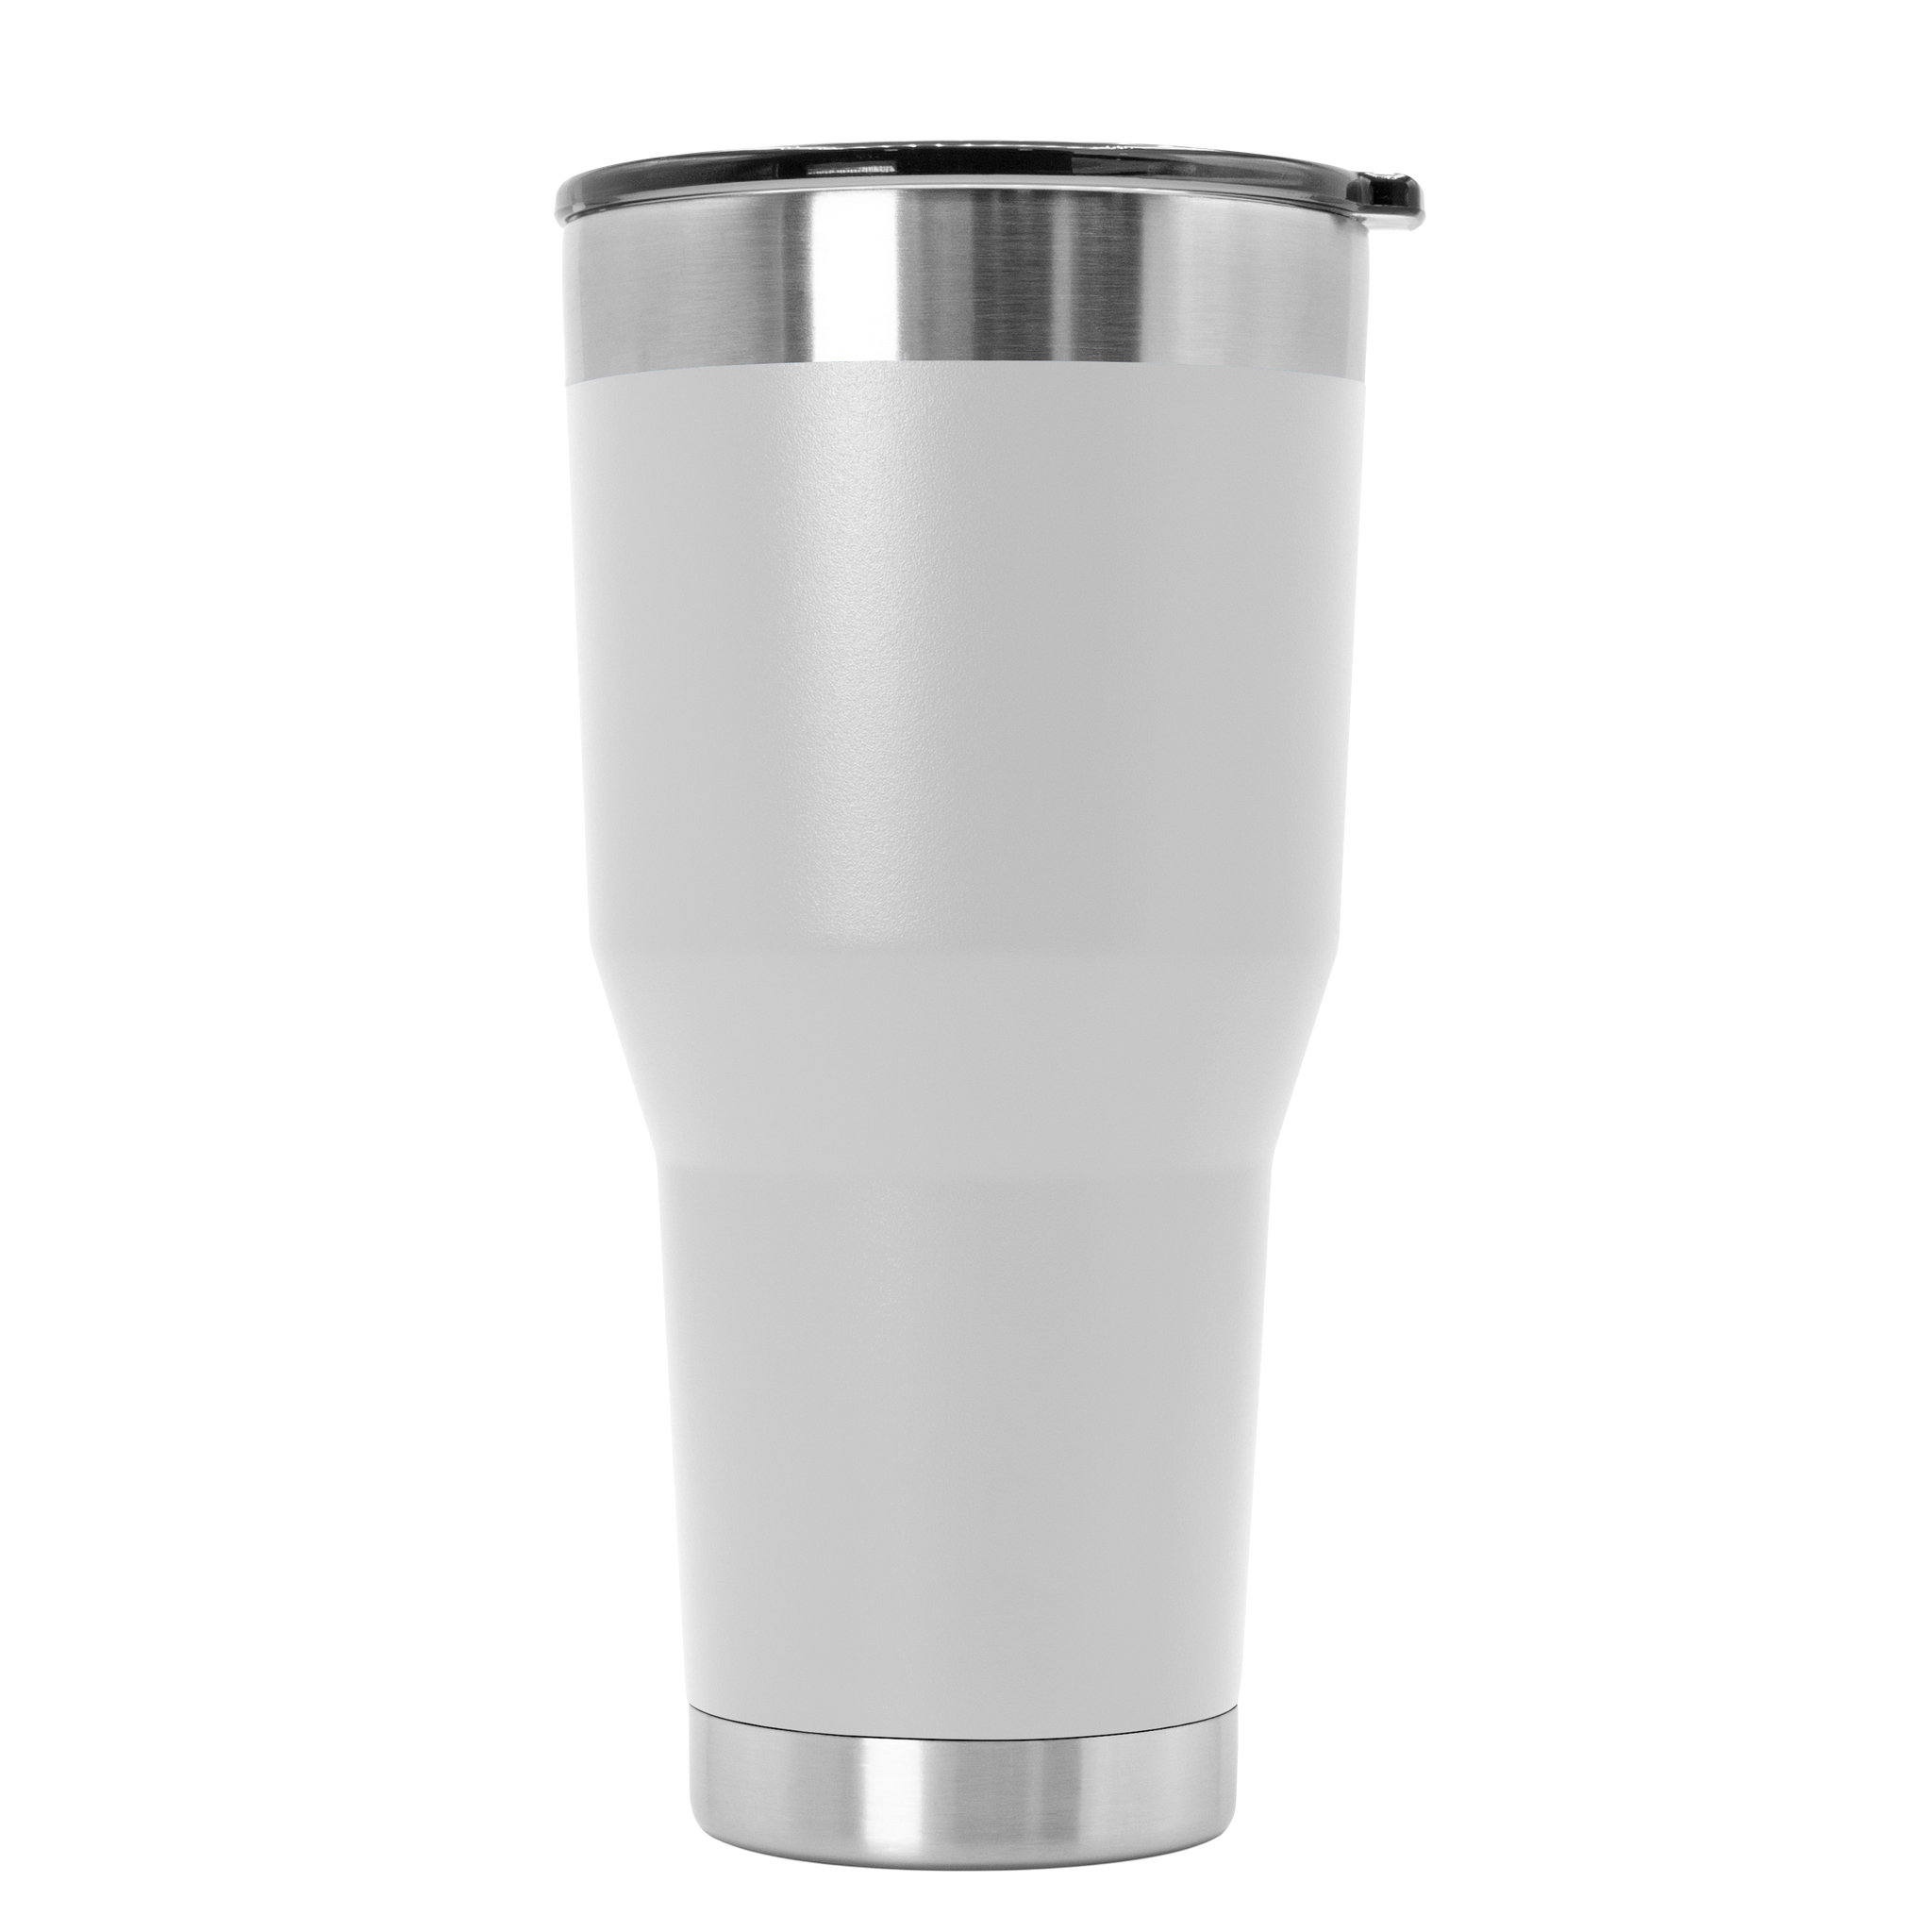 Tempercraft Stainless Steel Insulated Tumbler 20oz - Black at